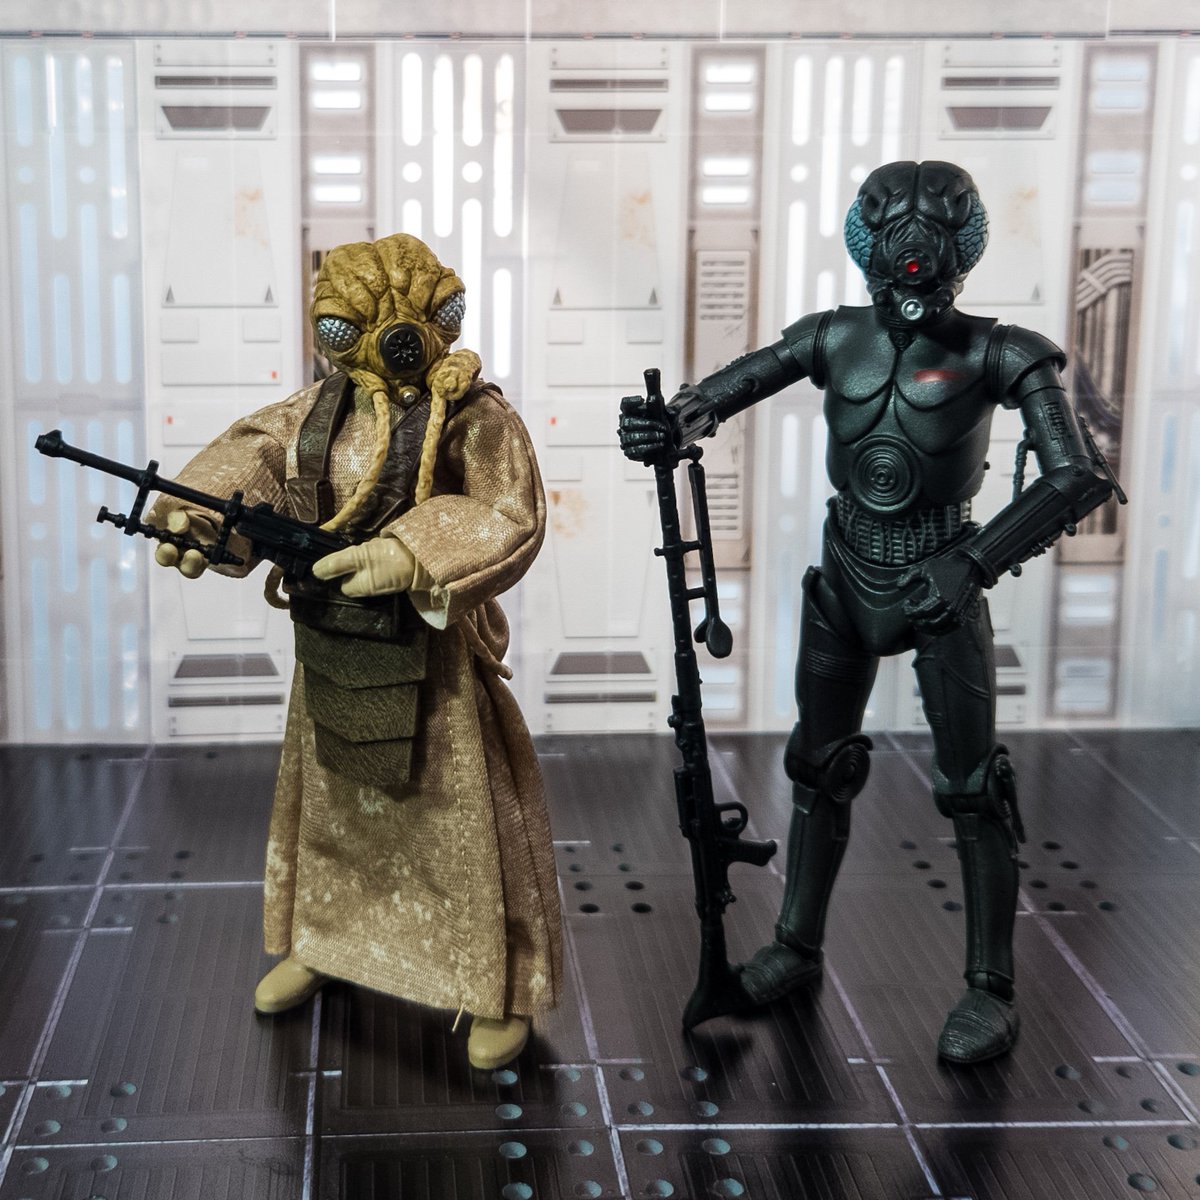 'Of Possible Futures'

#StarWars #TheBlackSeries #BlackSeries #Zuckuss #4LOM #BountyHunters #Hasbro #ActionFigures #Toys #ToyPhotography #ToyCollecting